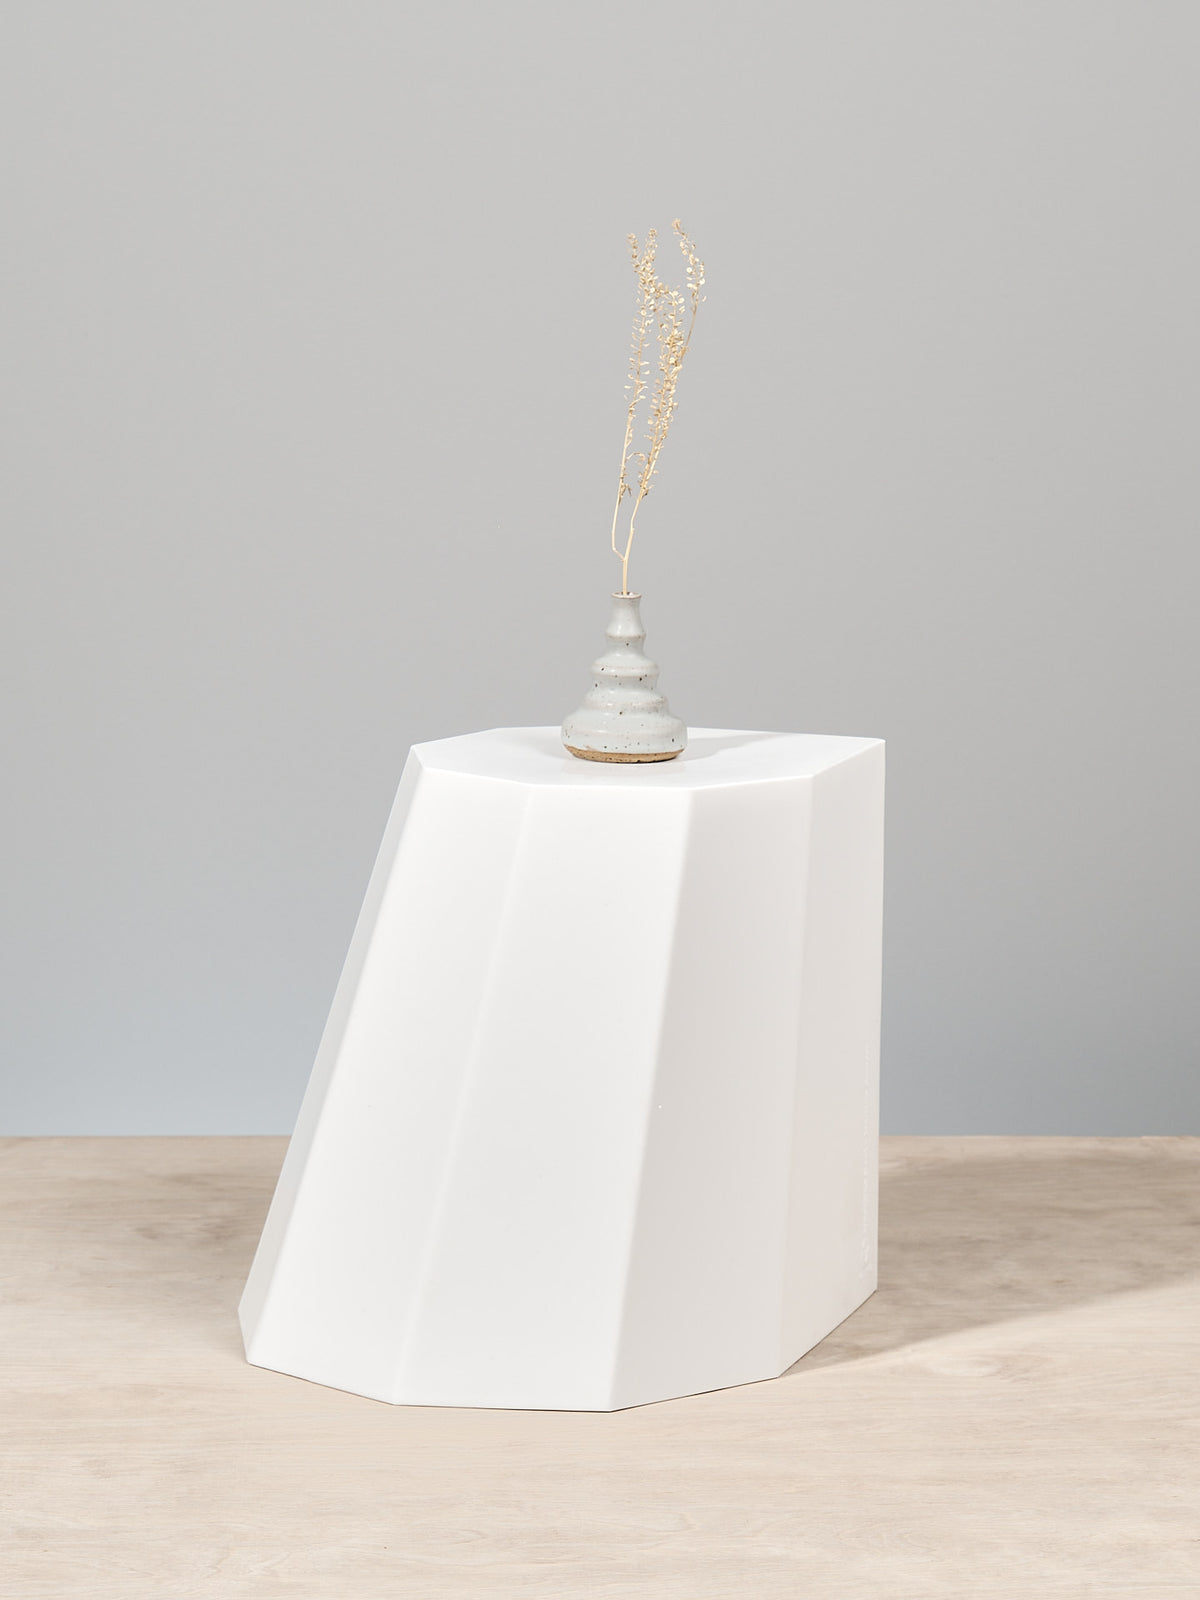 An Arnoldino Stool – Chalk by Martino Gamper with a plant on top.